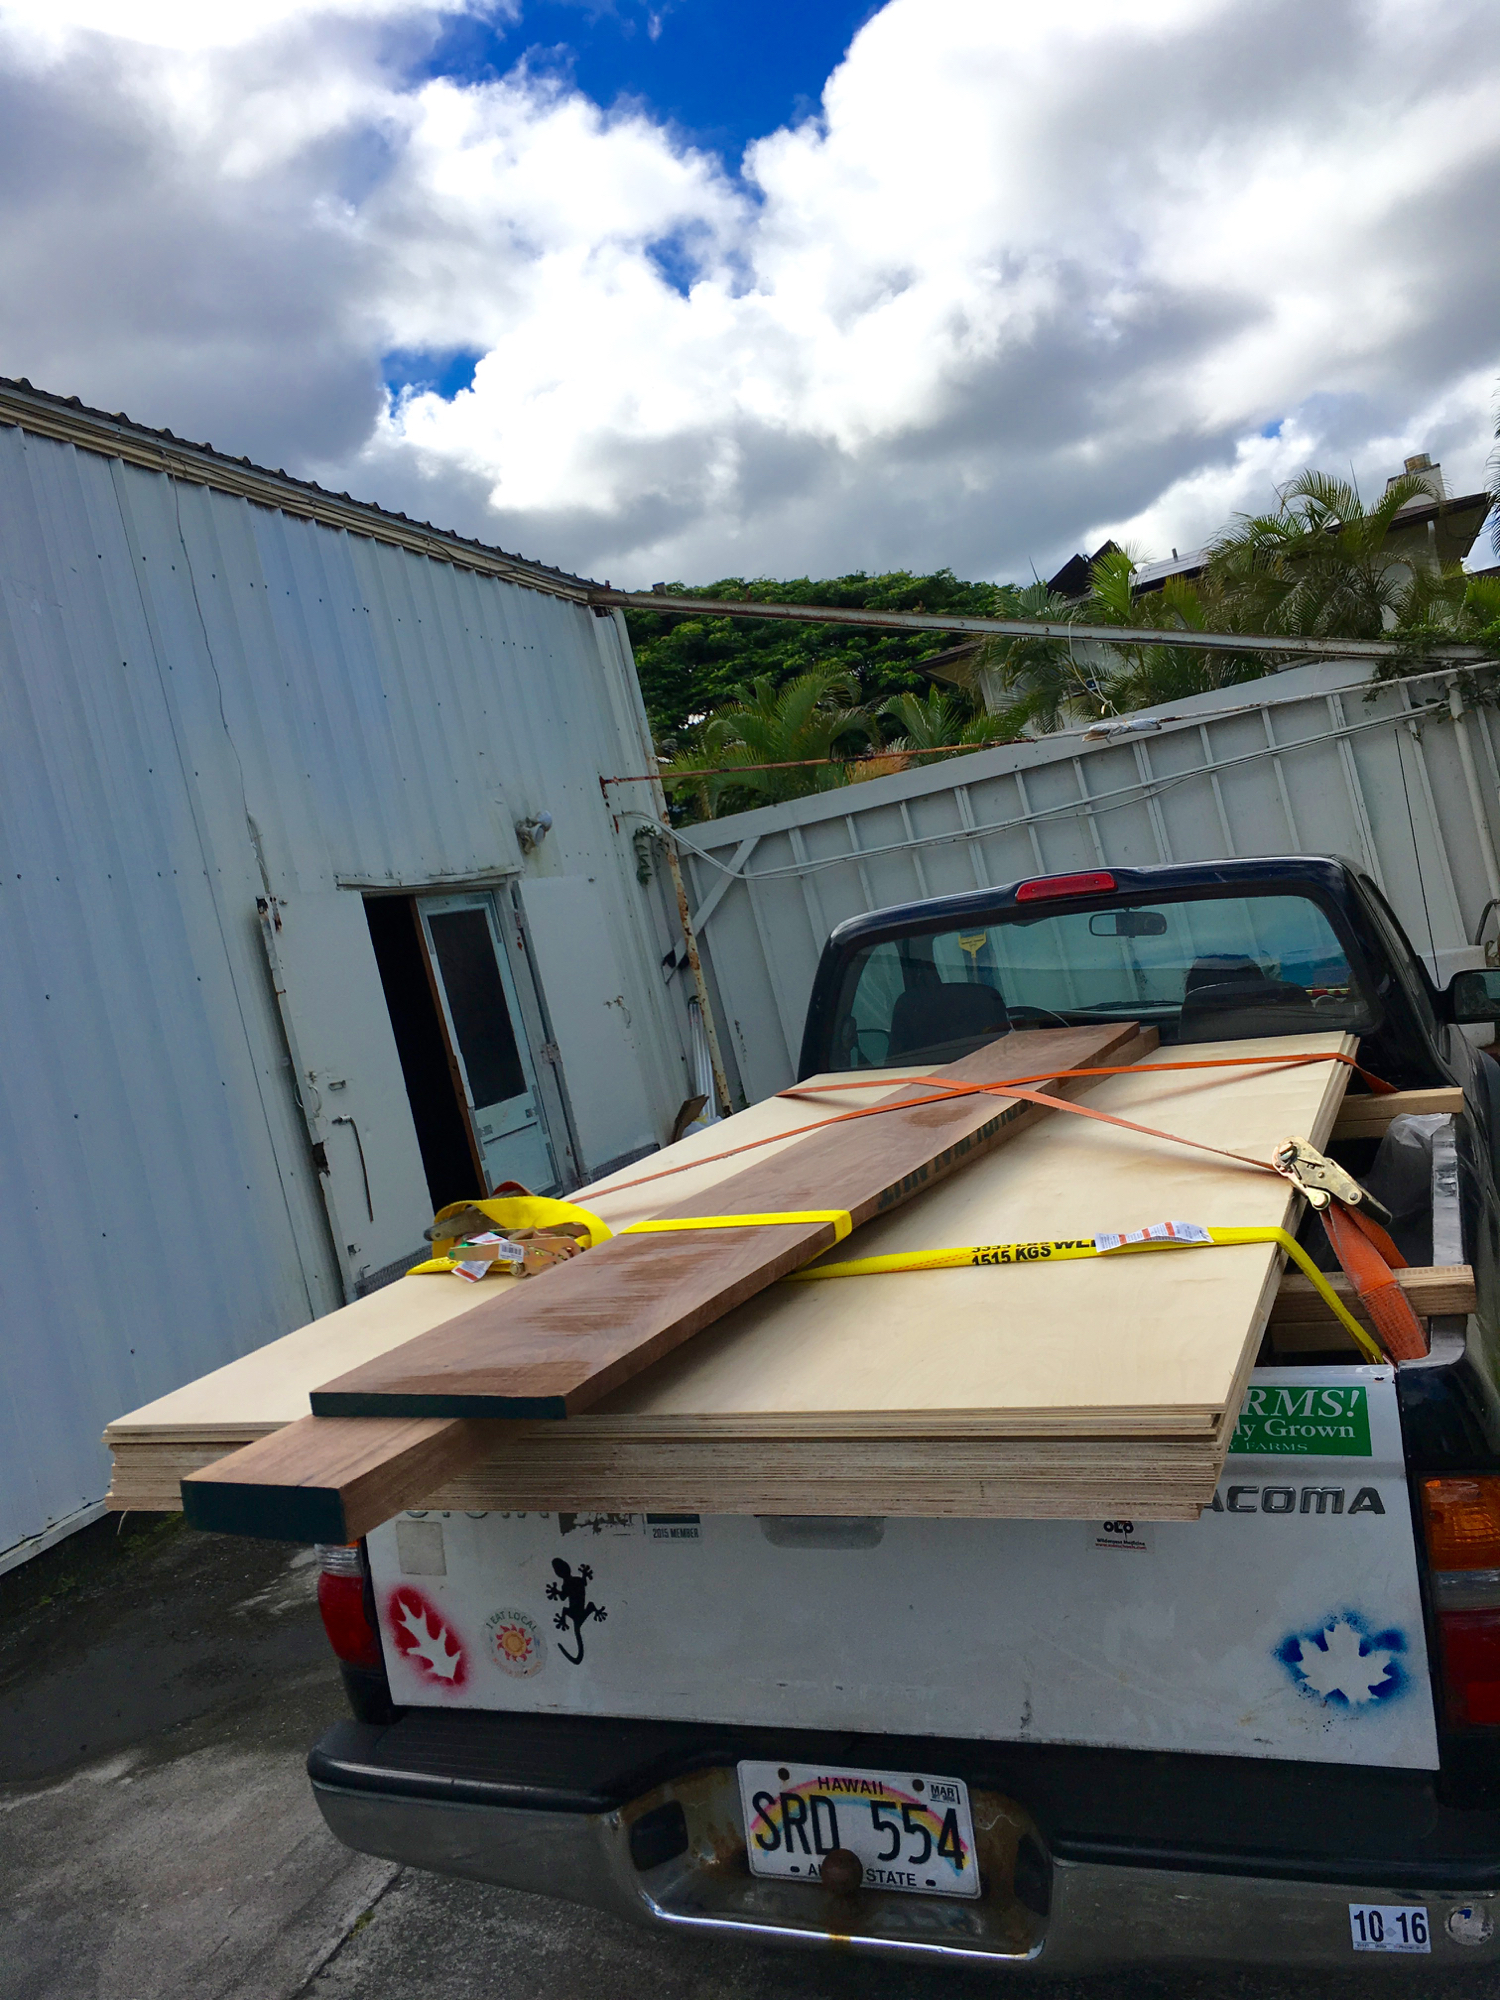  Transporting plywood and walnut for the entertainment center. The 2x4s on the bed rails of the truck are a great way to carry a lot of plywood in a small truck. Just have to be careful and strap them down really tight. There is a slight danger of th